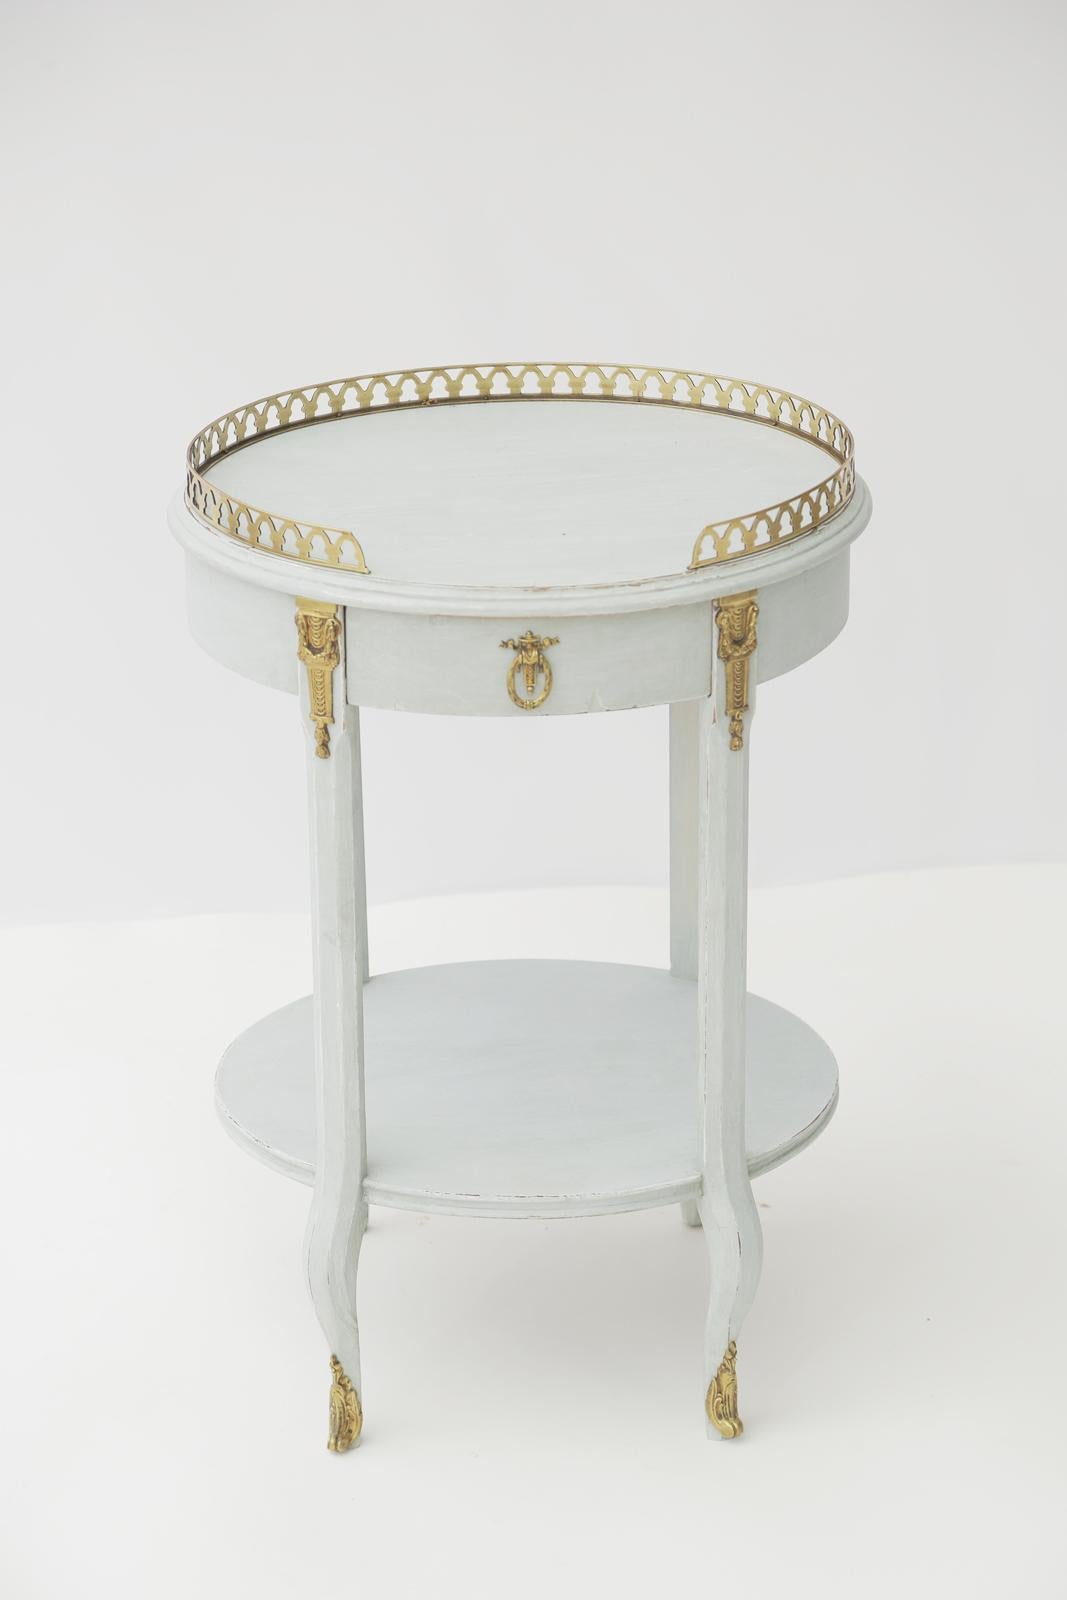 Neoclassical Painted Oval Occasional Table with Bronze Gallery For Sale